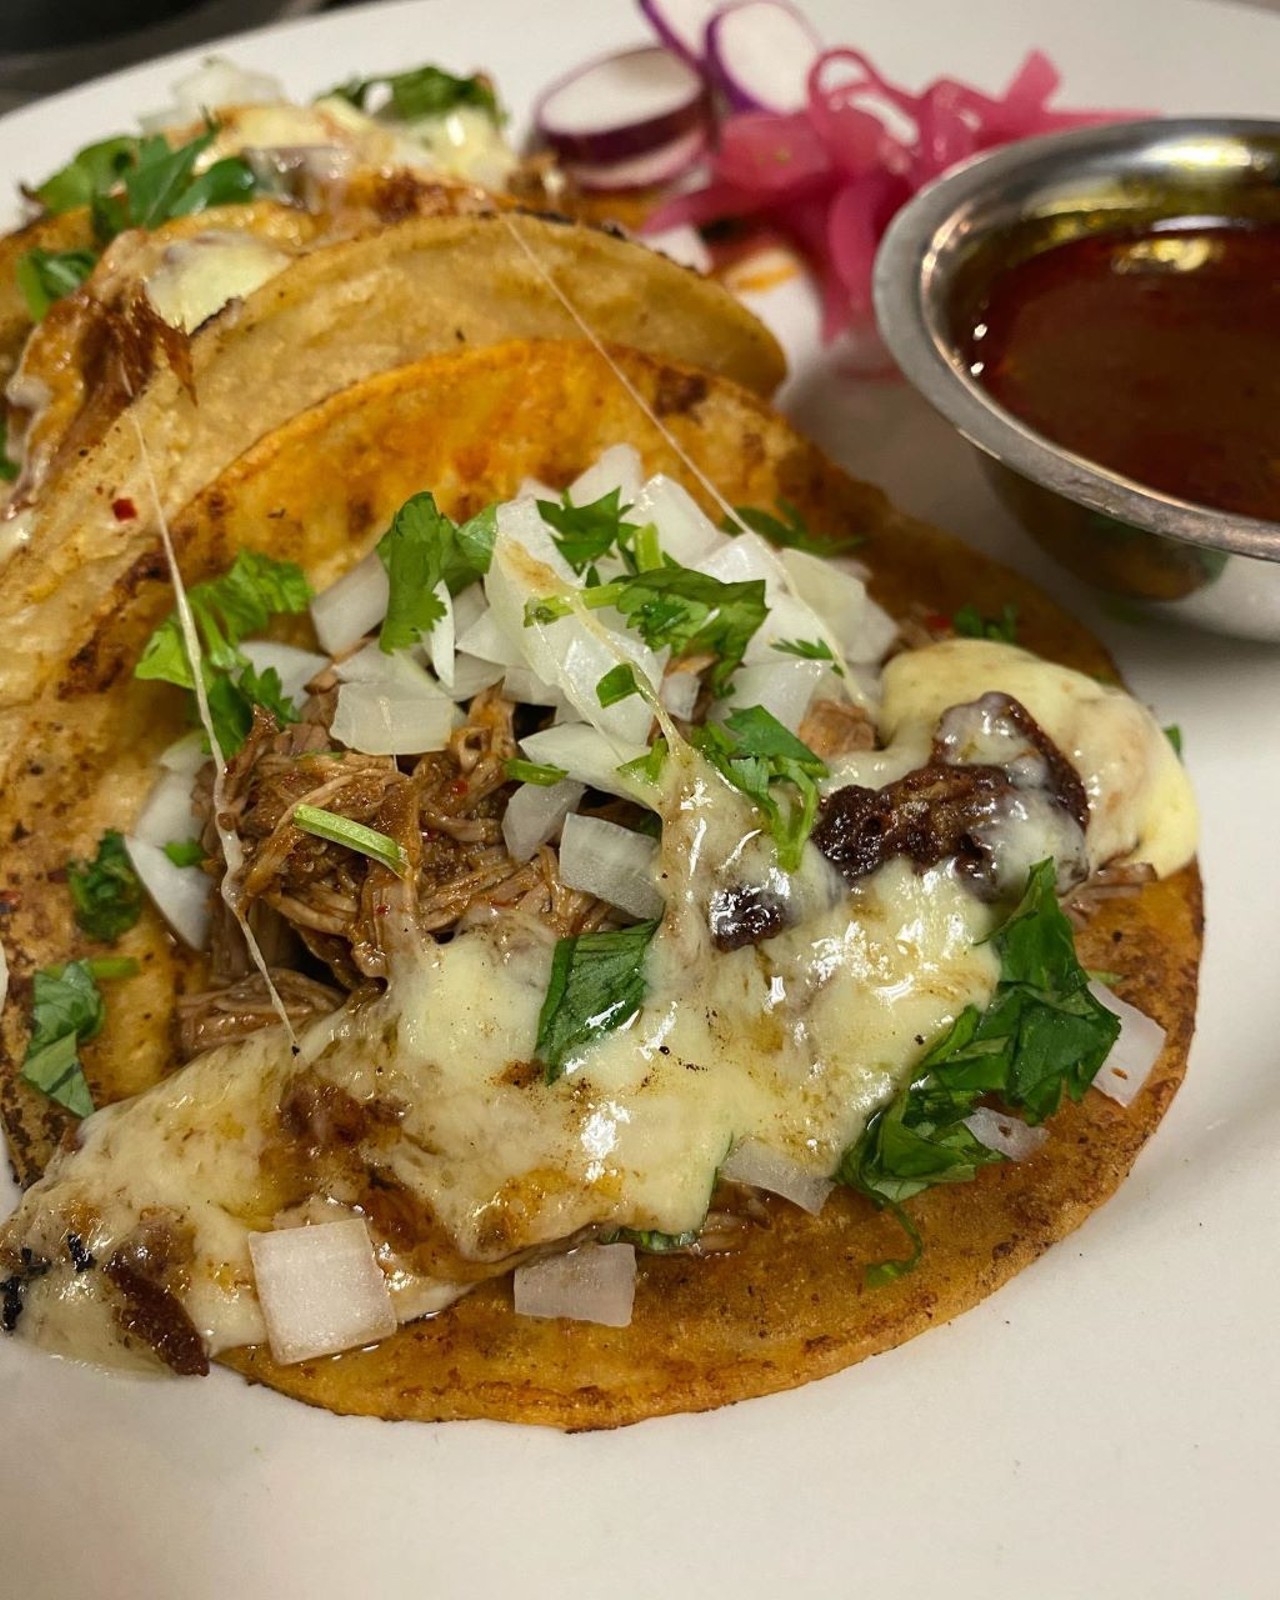 Coco Bar and Tapas 
104 S. Eola Drive
Whether it&#146;s in a tamale, burger, or taco, Coco Bar and Tapas has the perfect birria dish waiting for you. Pro tip -- stop by for brunch (birria included) and grab a bottomless mimosa or sangria. 
Photo via Coco Bar and Tapas/Facebook